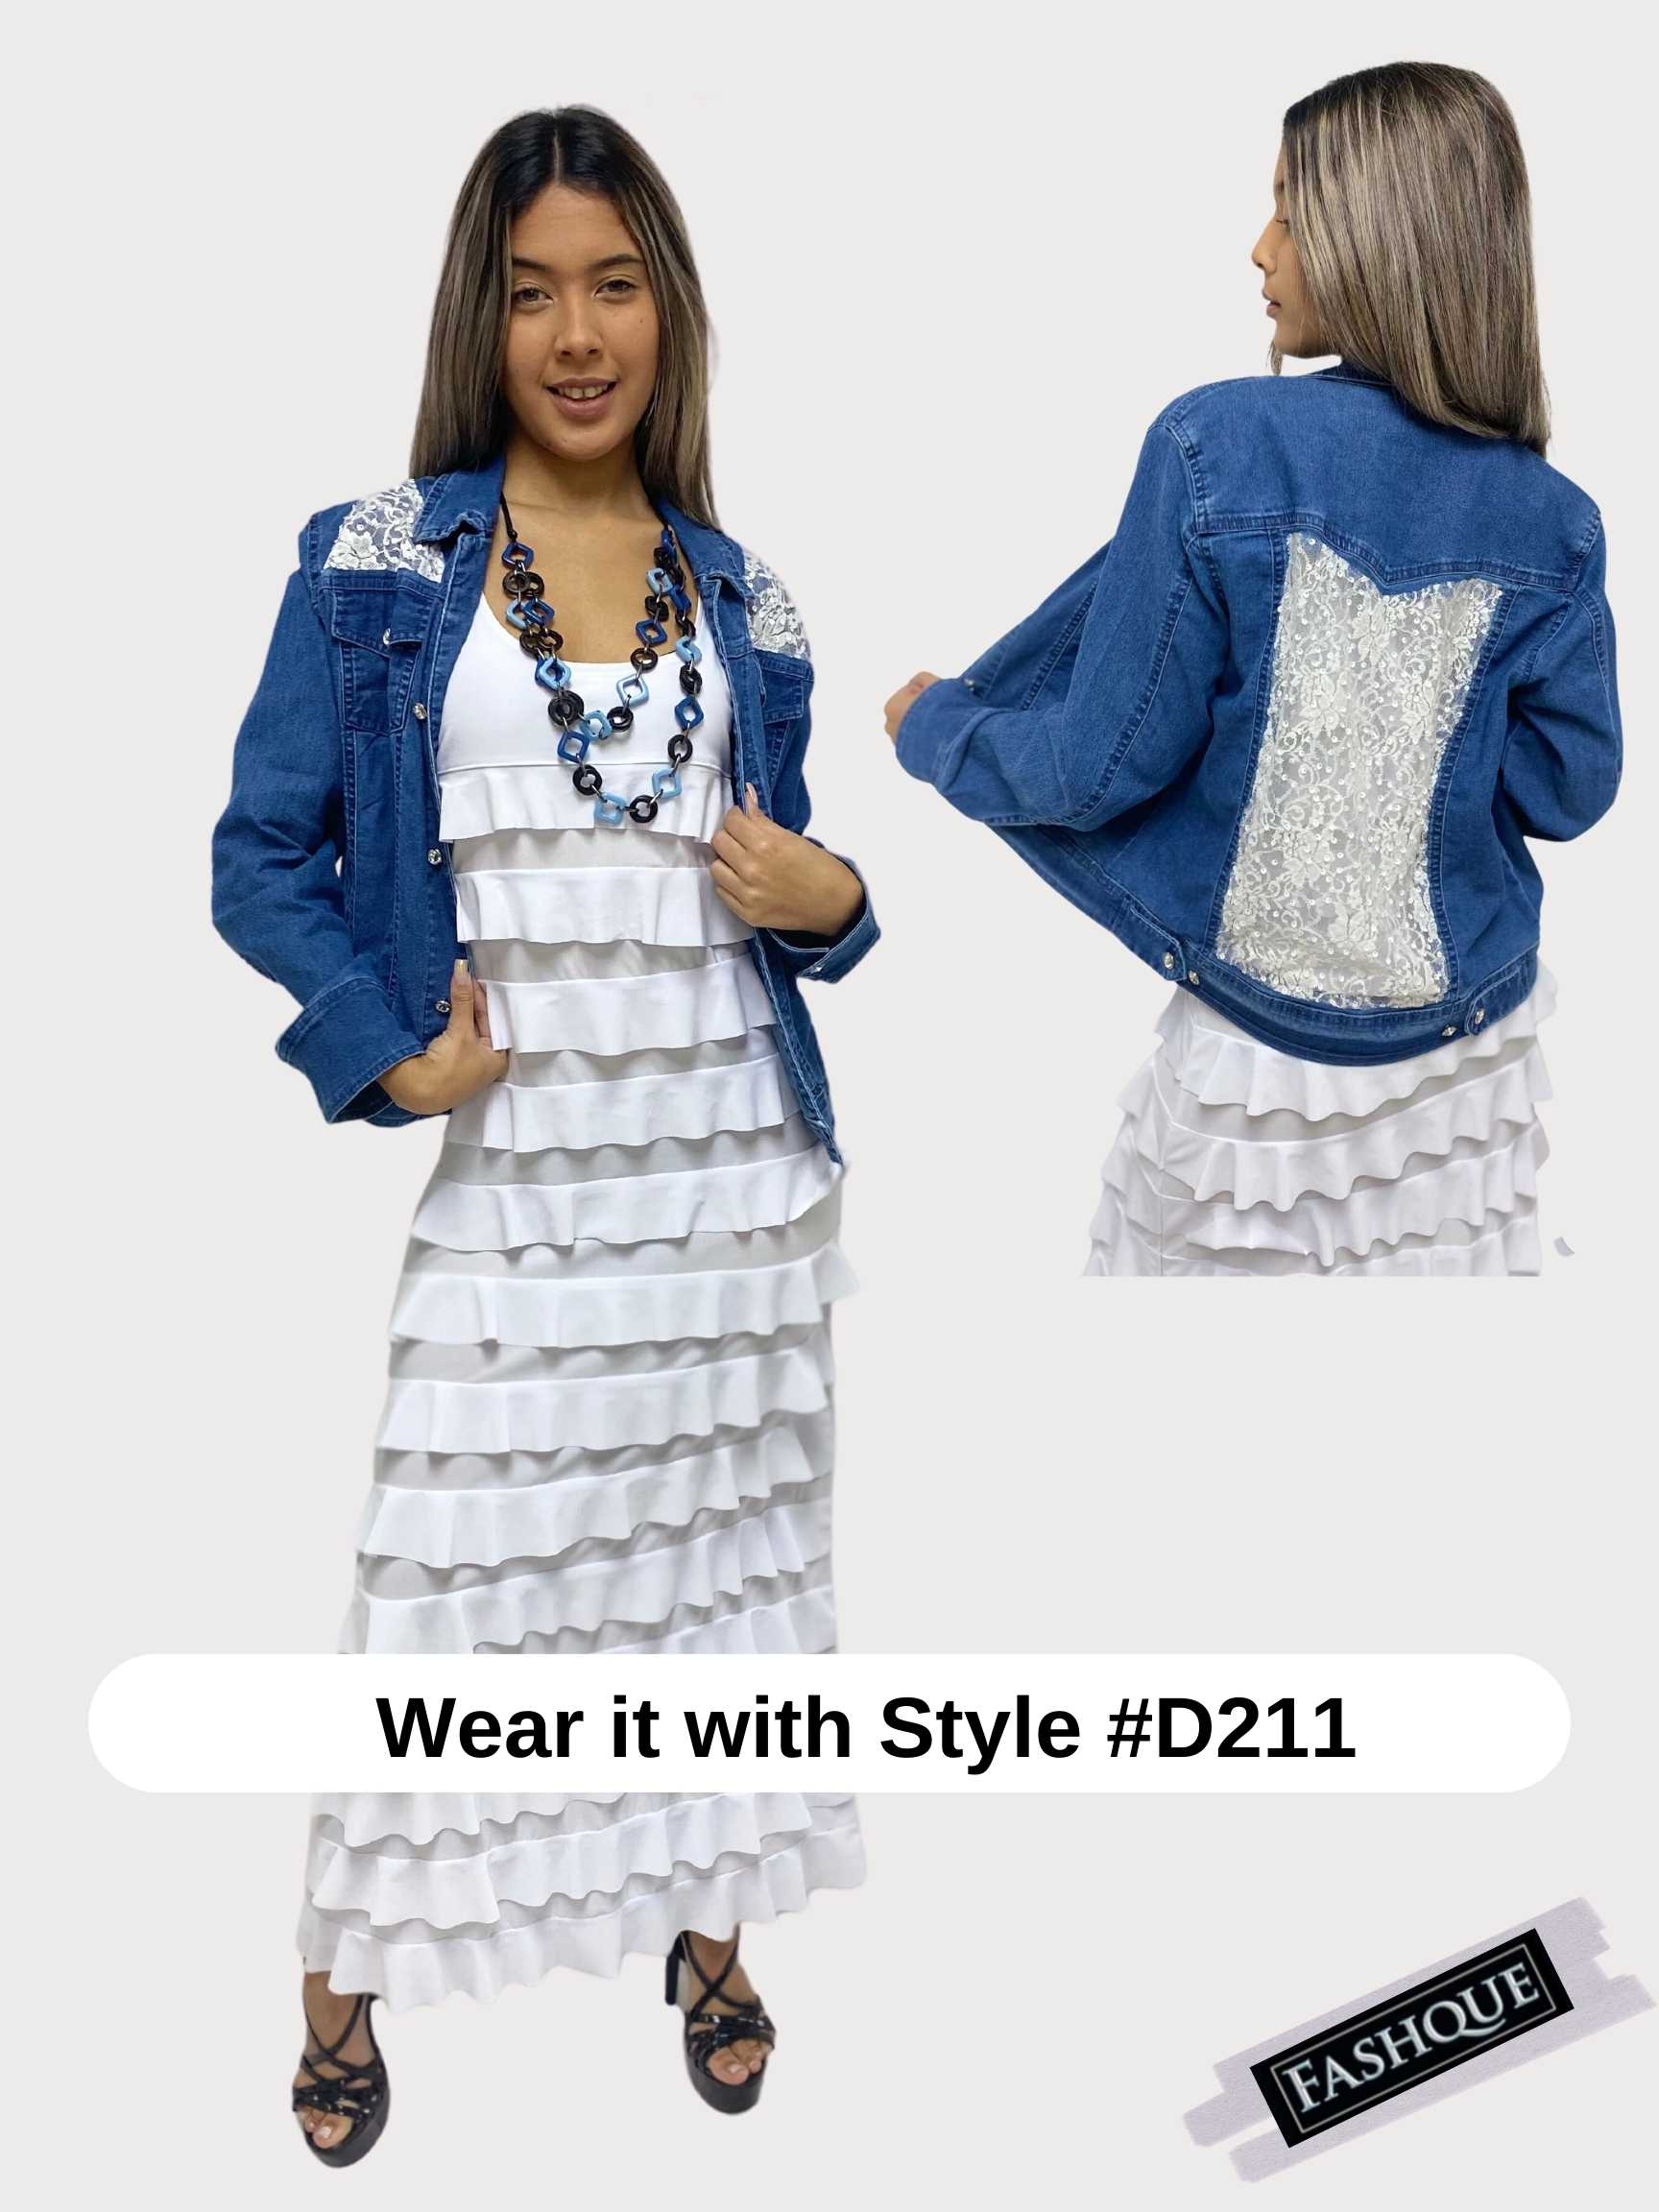 FASHQUE - Denim Jacket for women with Patchwork - T657